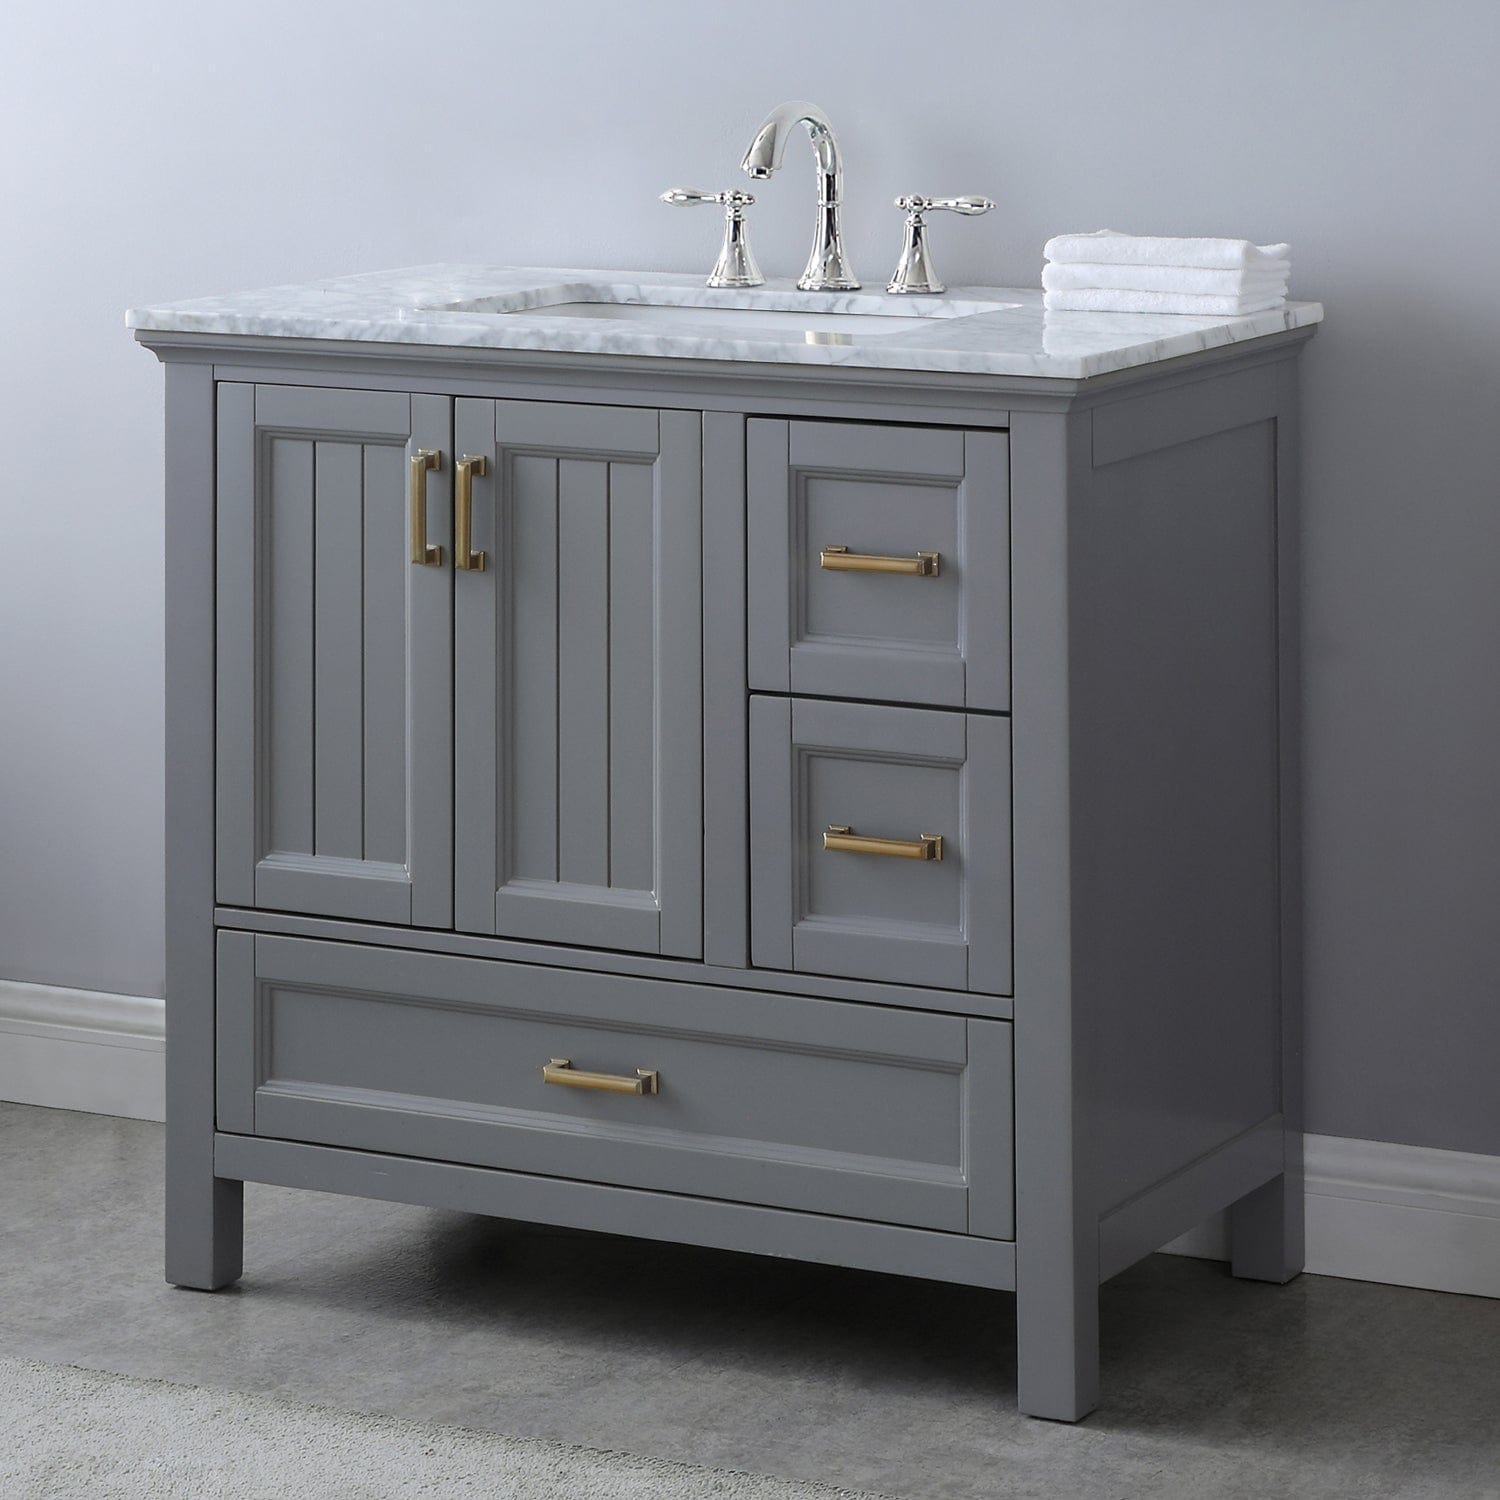 Altair Isla 36" Single Bathroom Vanity Set in Gray and Carrara White Marble Countertop without Mirror 538036-GR-CA-NM - Molaix631112970785Vanity538036-GR-CA-NM